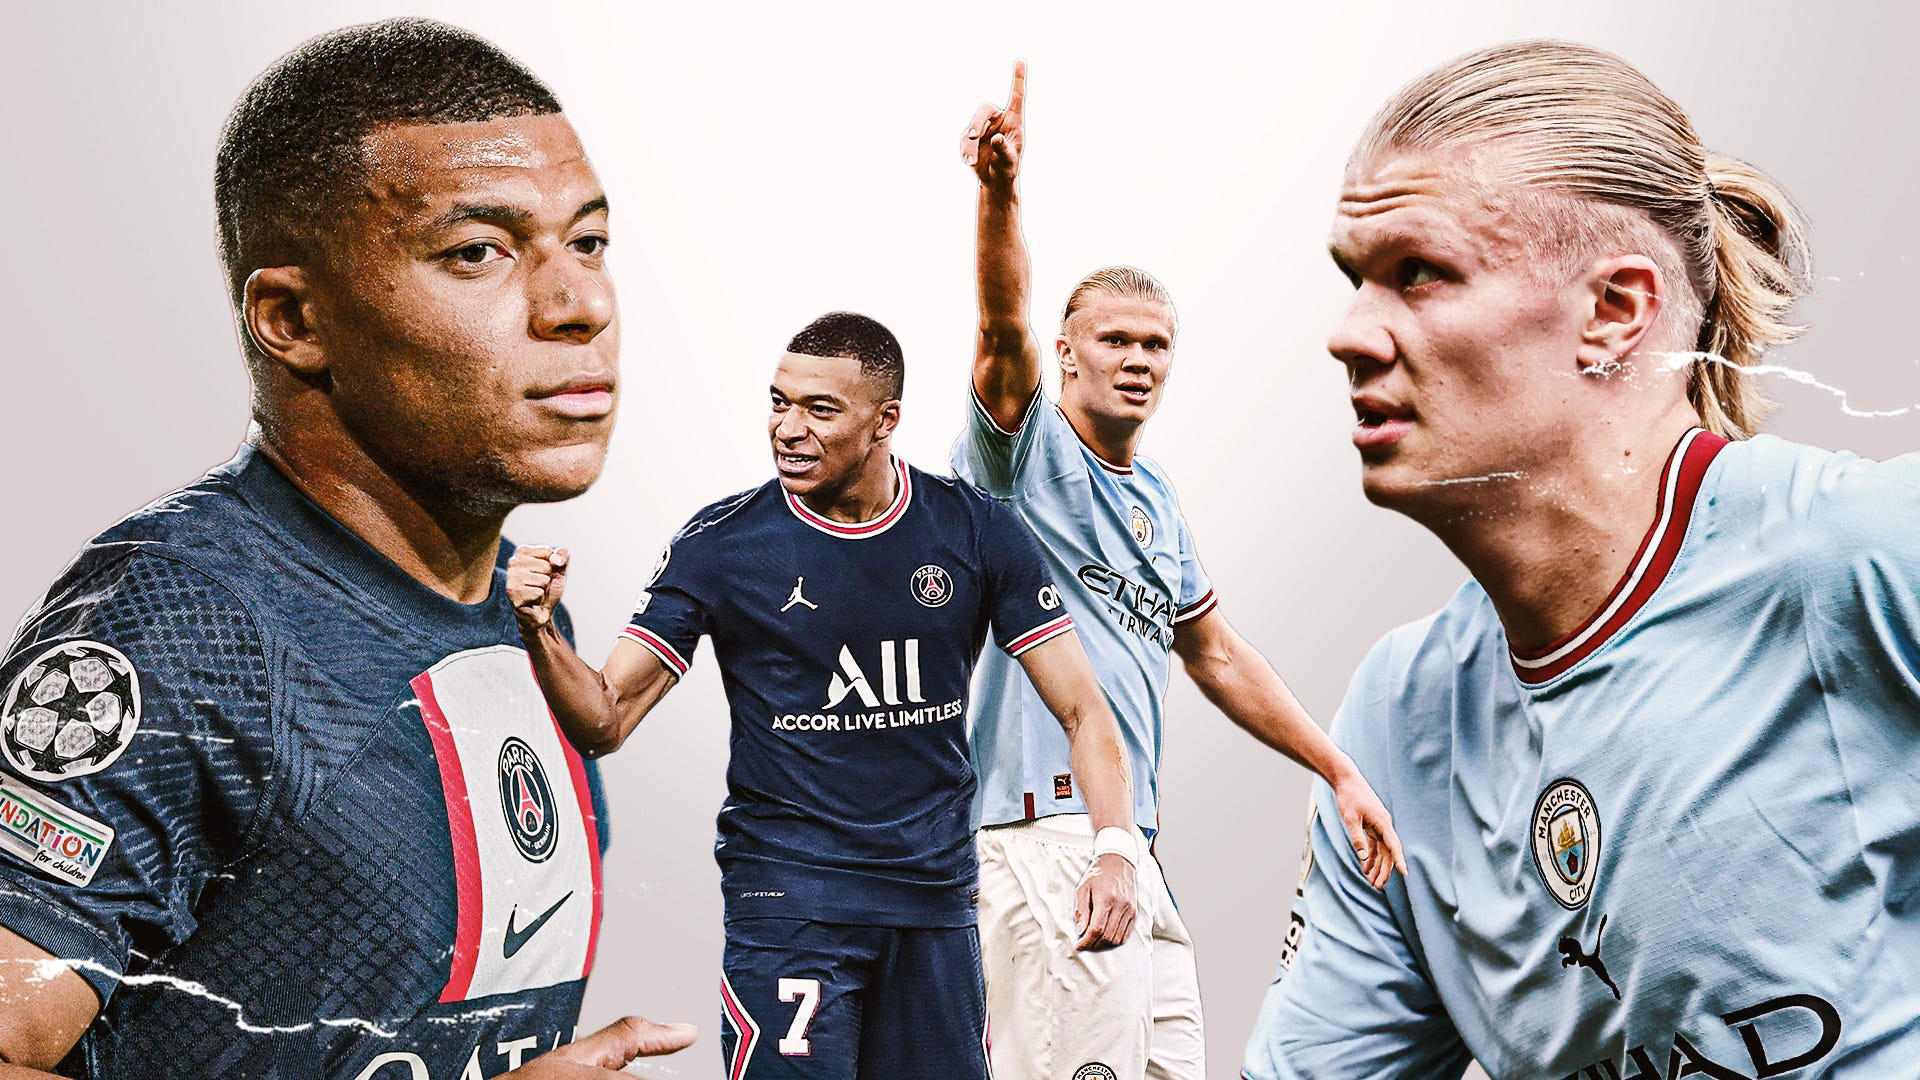 Kylian Mbappe Vs Erling Haaland Who Is The Future Goat The Stats Head To Head Showdown